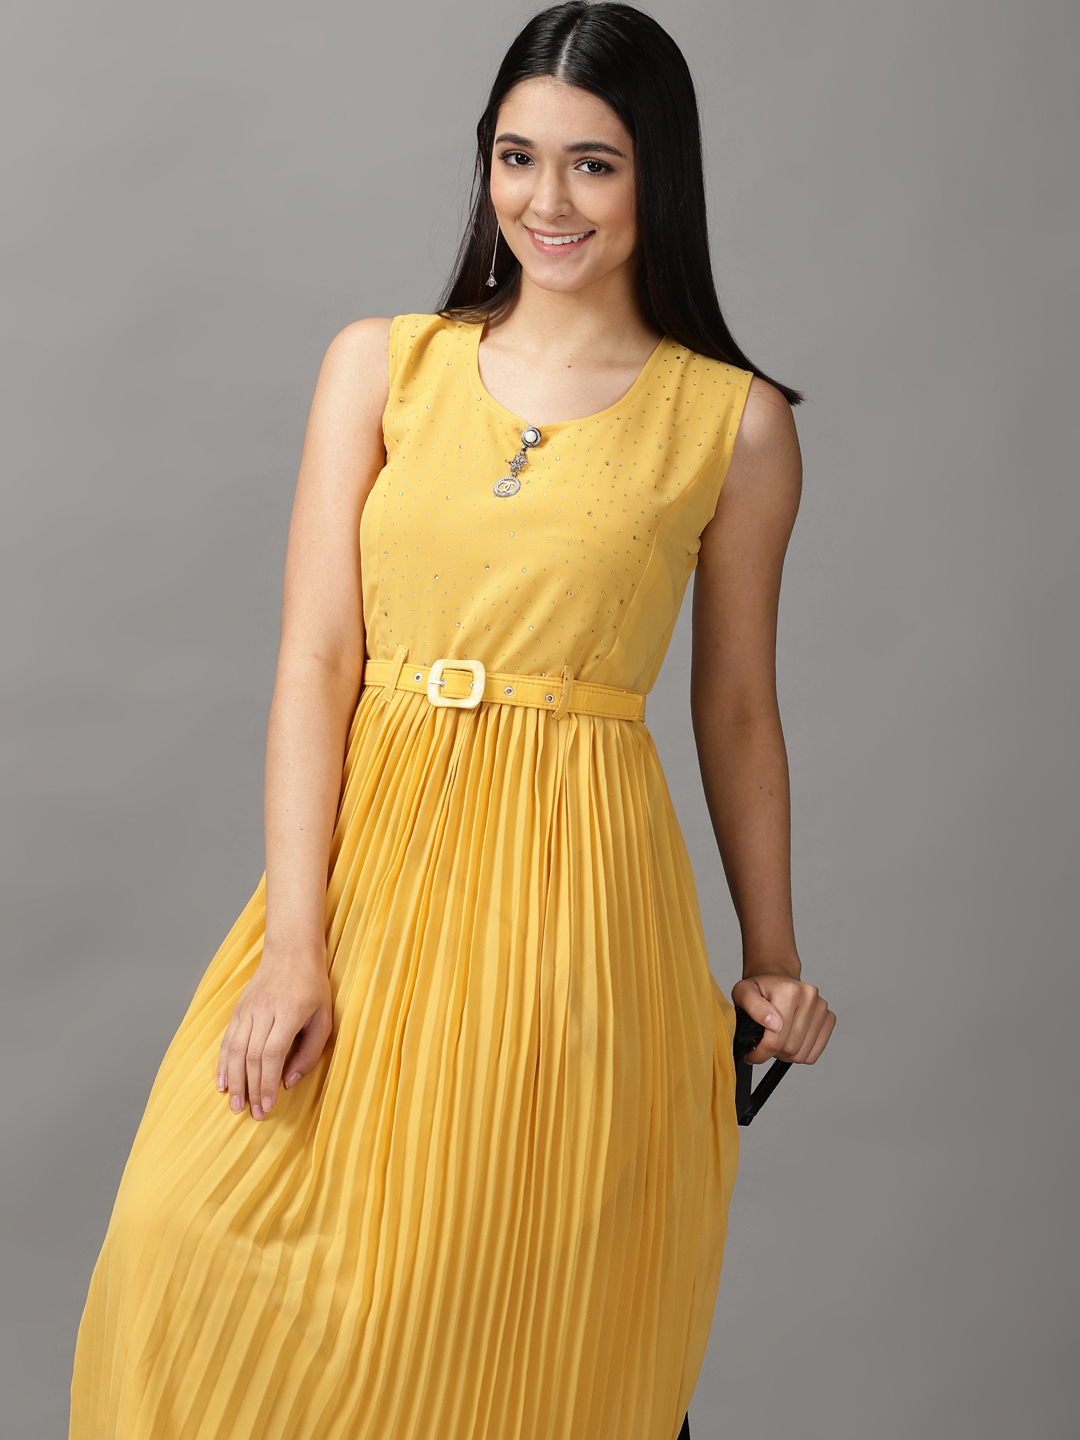 Women's Yellow Polyester Solid Dresses